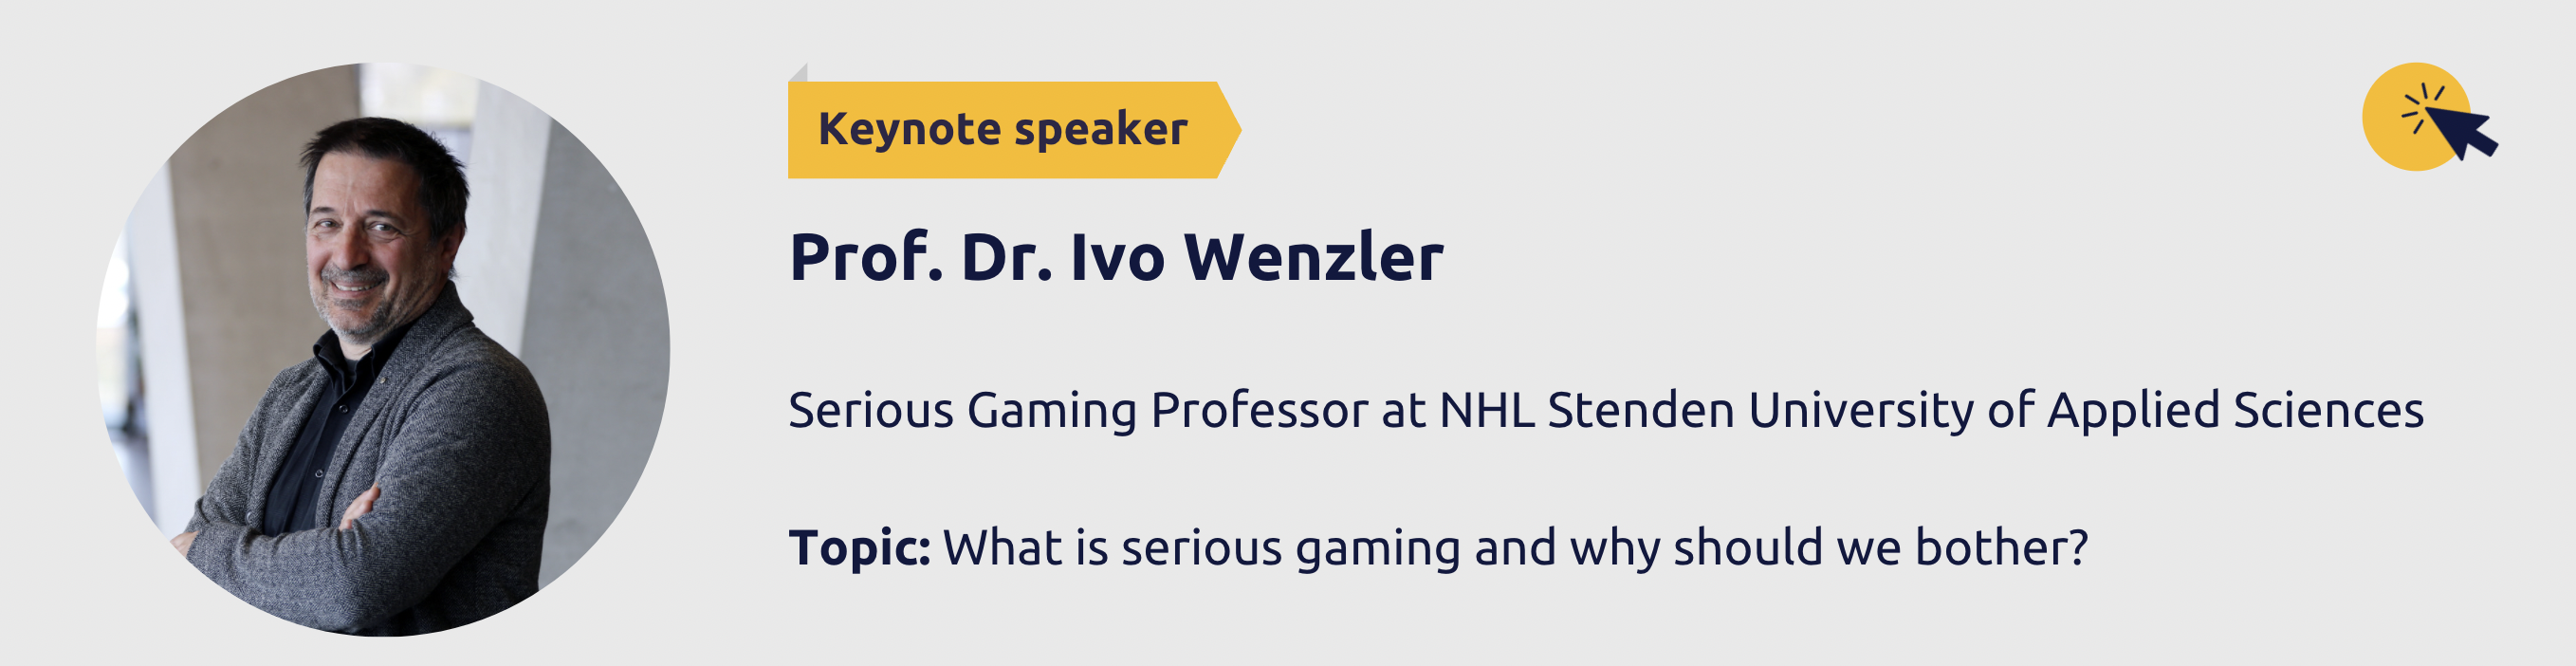 Prof. Dr. Ivo Wenzler is a Serious Gaming Professor at NHL Stenden University of Applied Sciences The topic of his presentation is "What is serious gaming and why should we bother?"